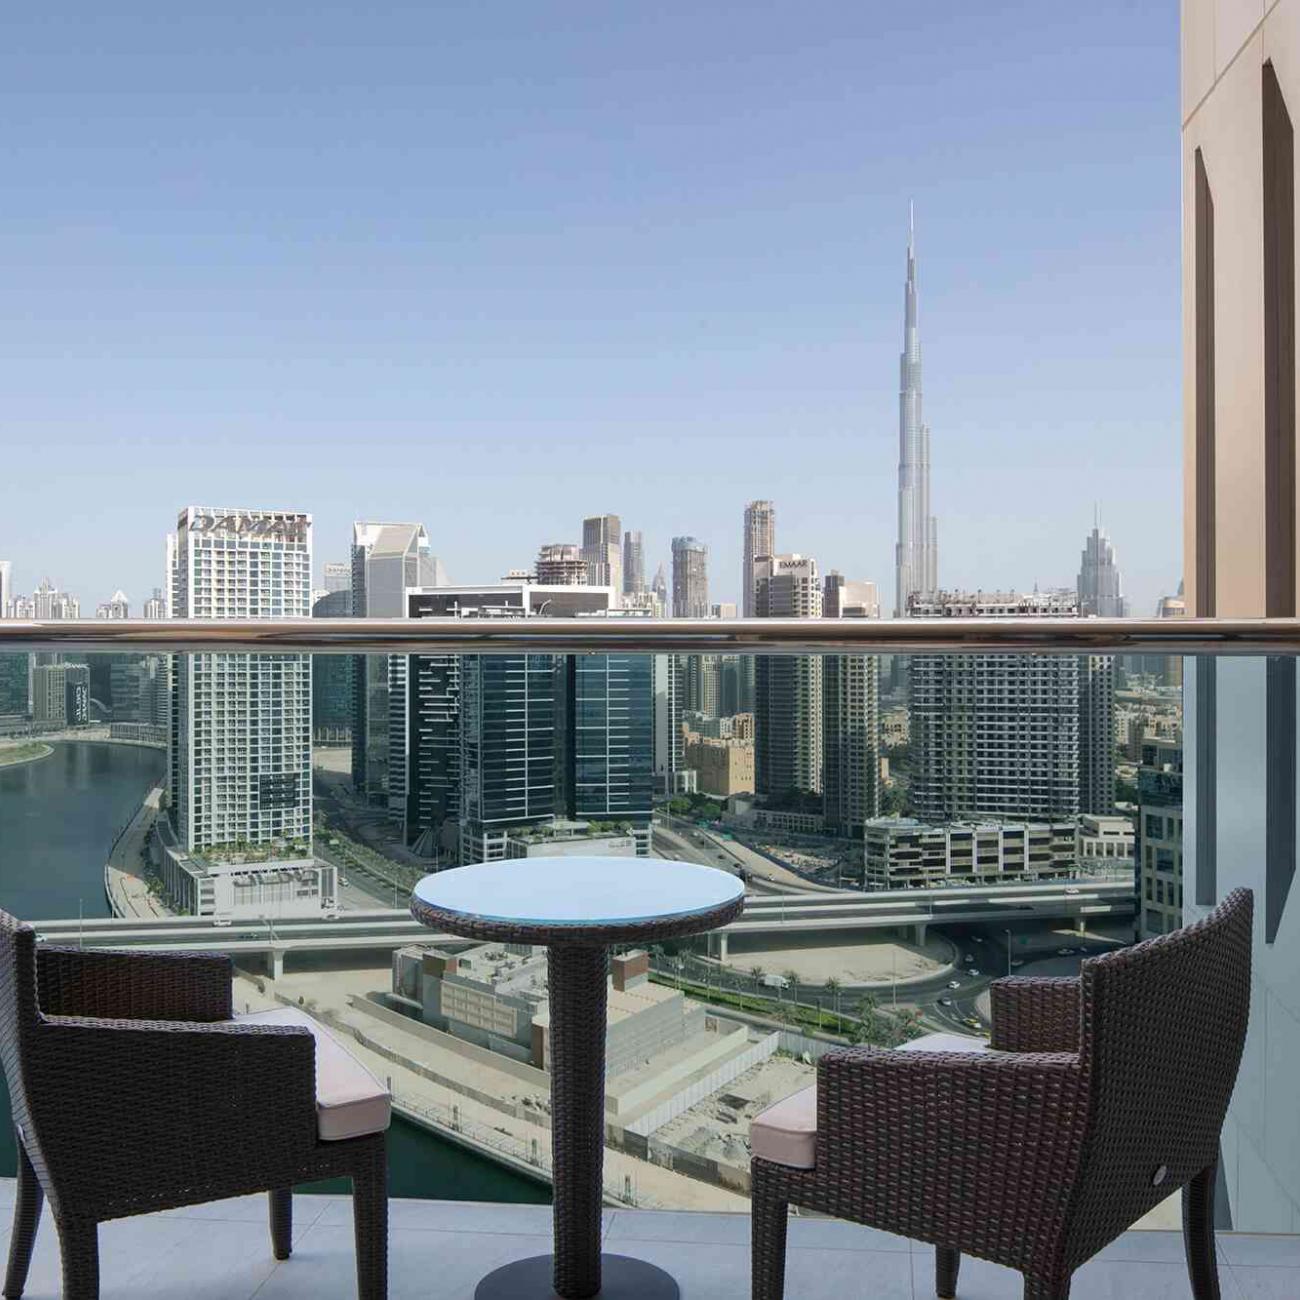 A view from the room balcony with 2 chairs and a coffee table, with a high rise view of Dubai City and Burj Khalifa building